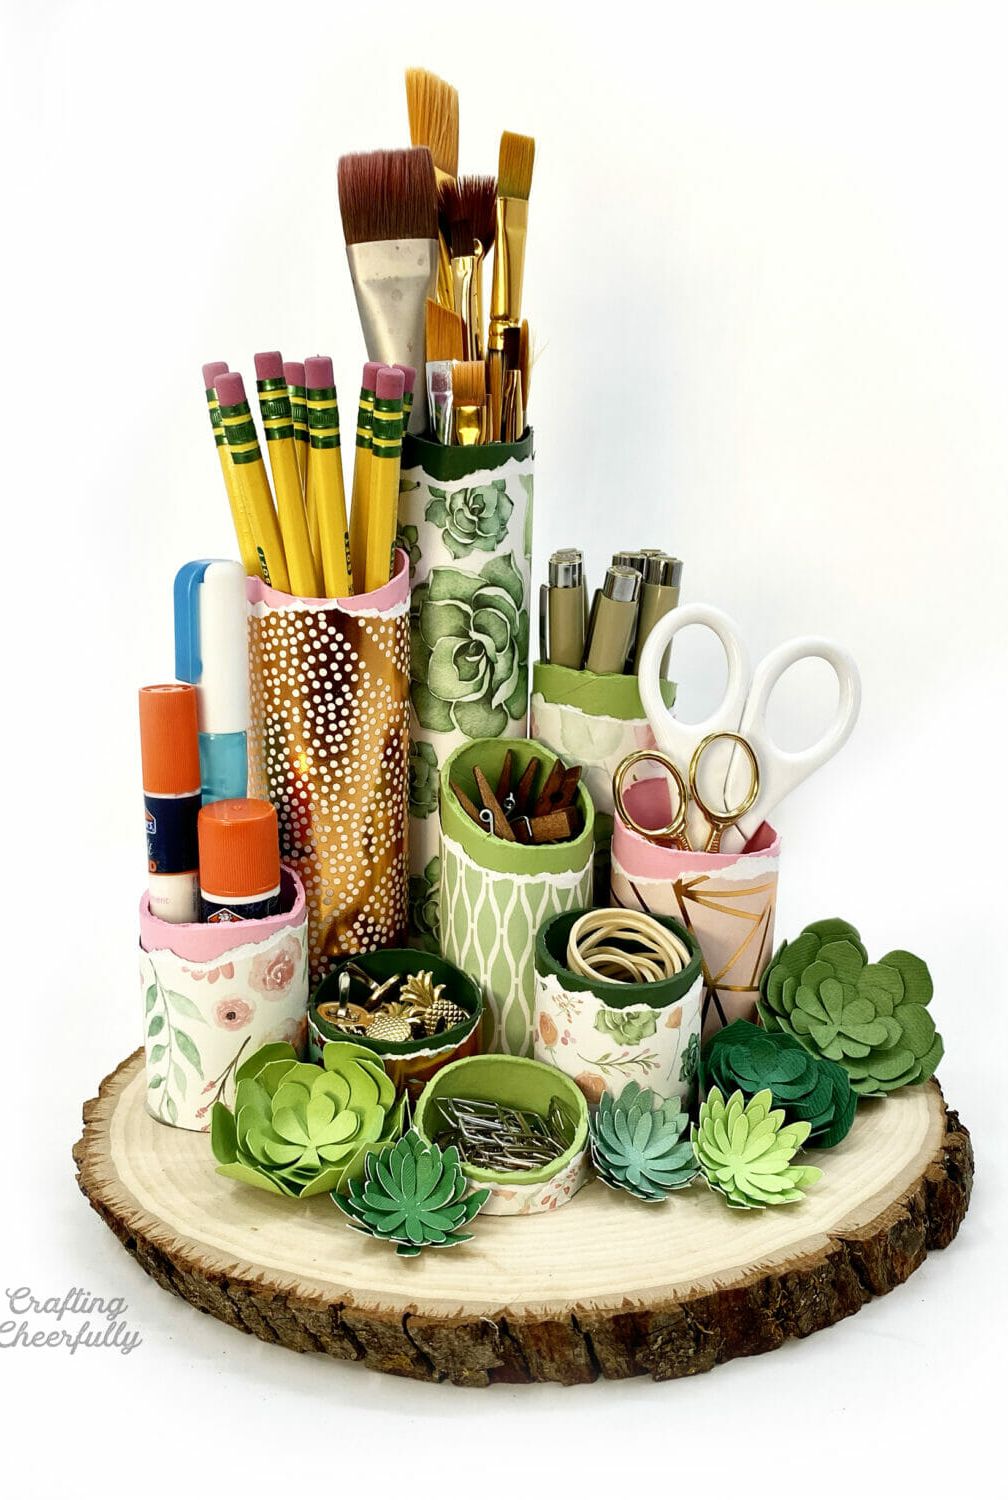 art and craft ideas from waste material